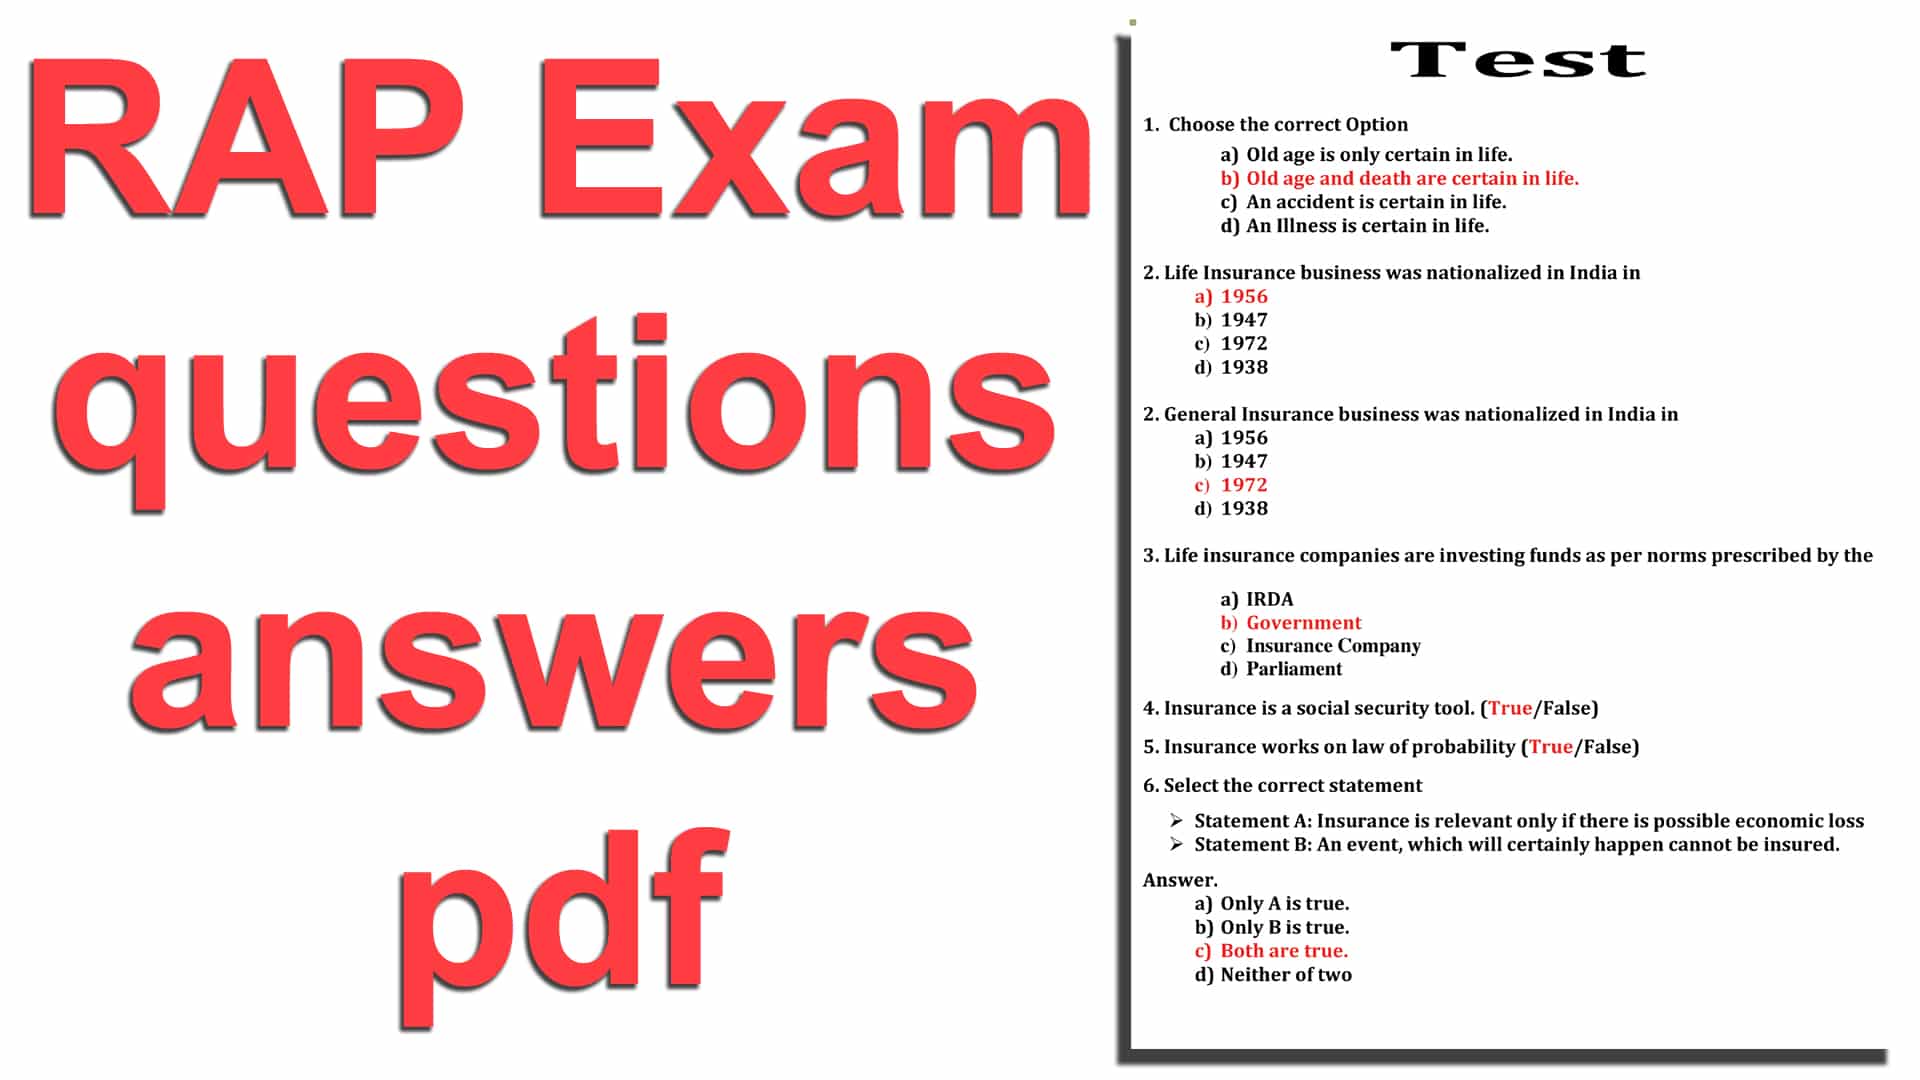 RAP Exam questions and answers pdf download